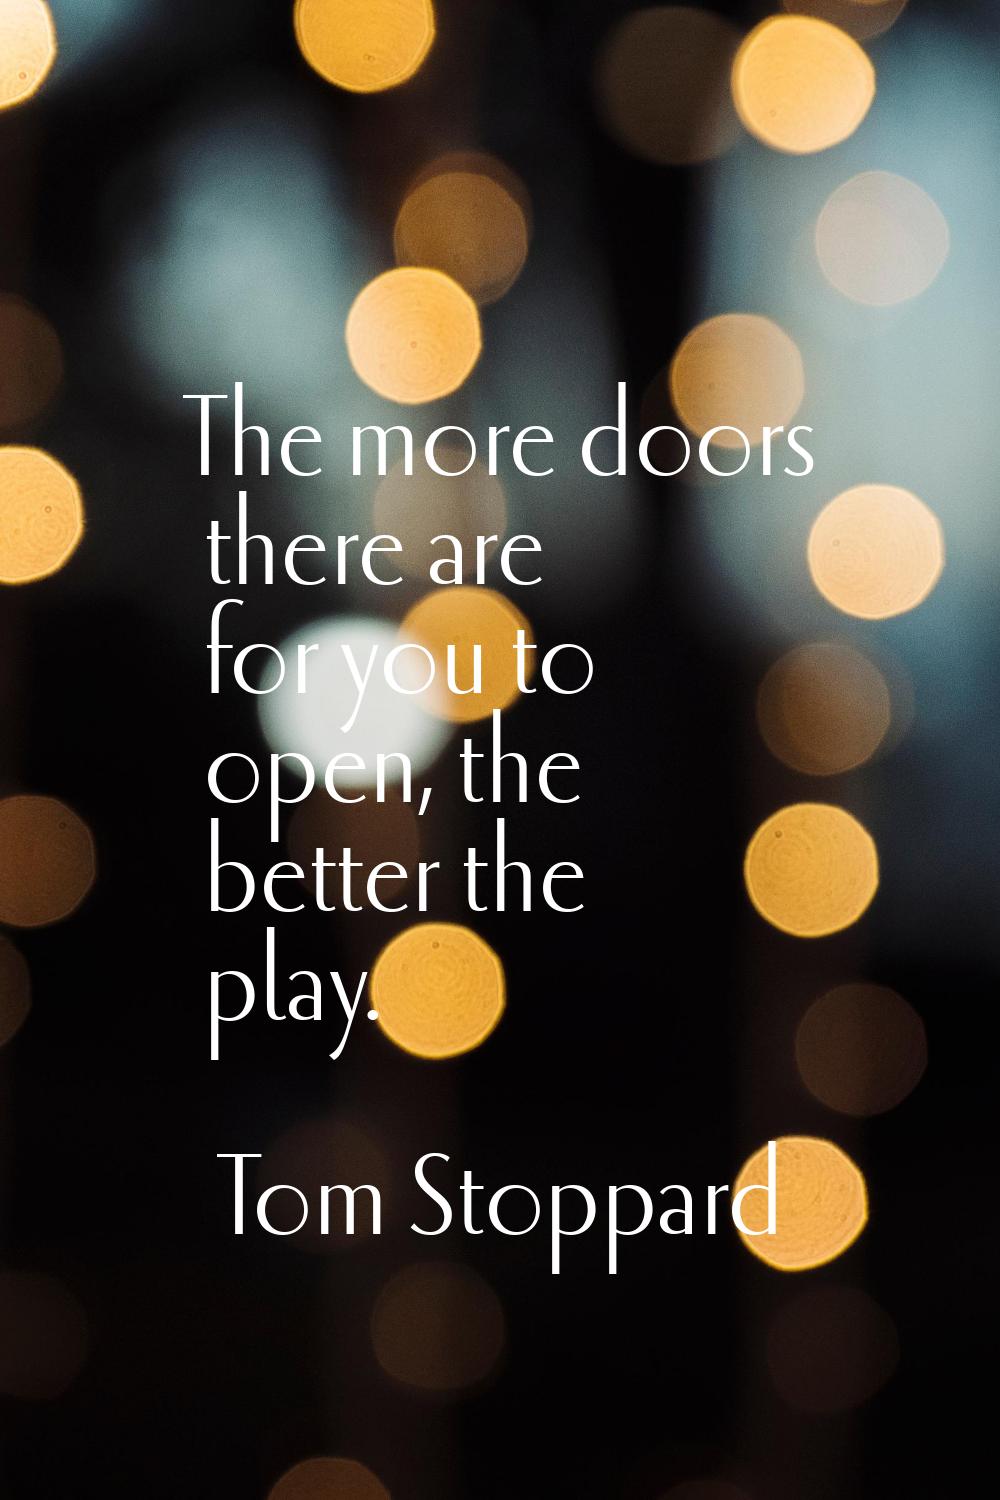 The more doors there are for you to open, the better the play.